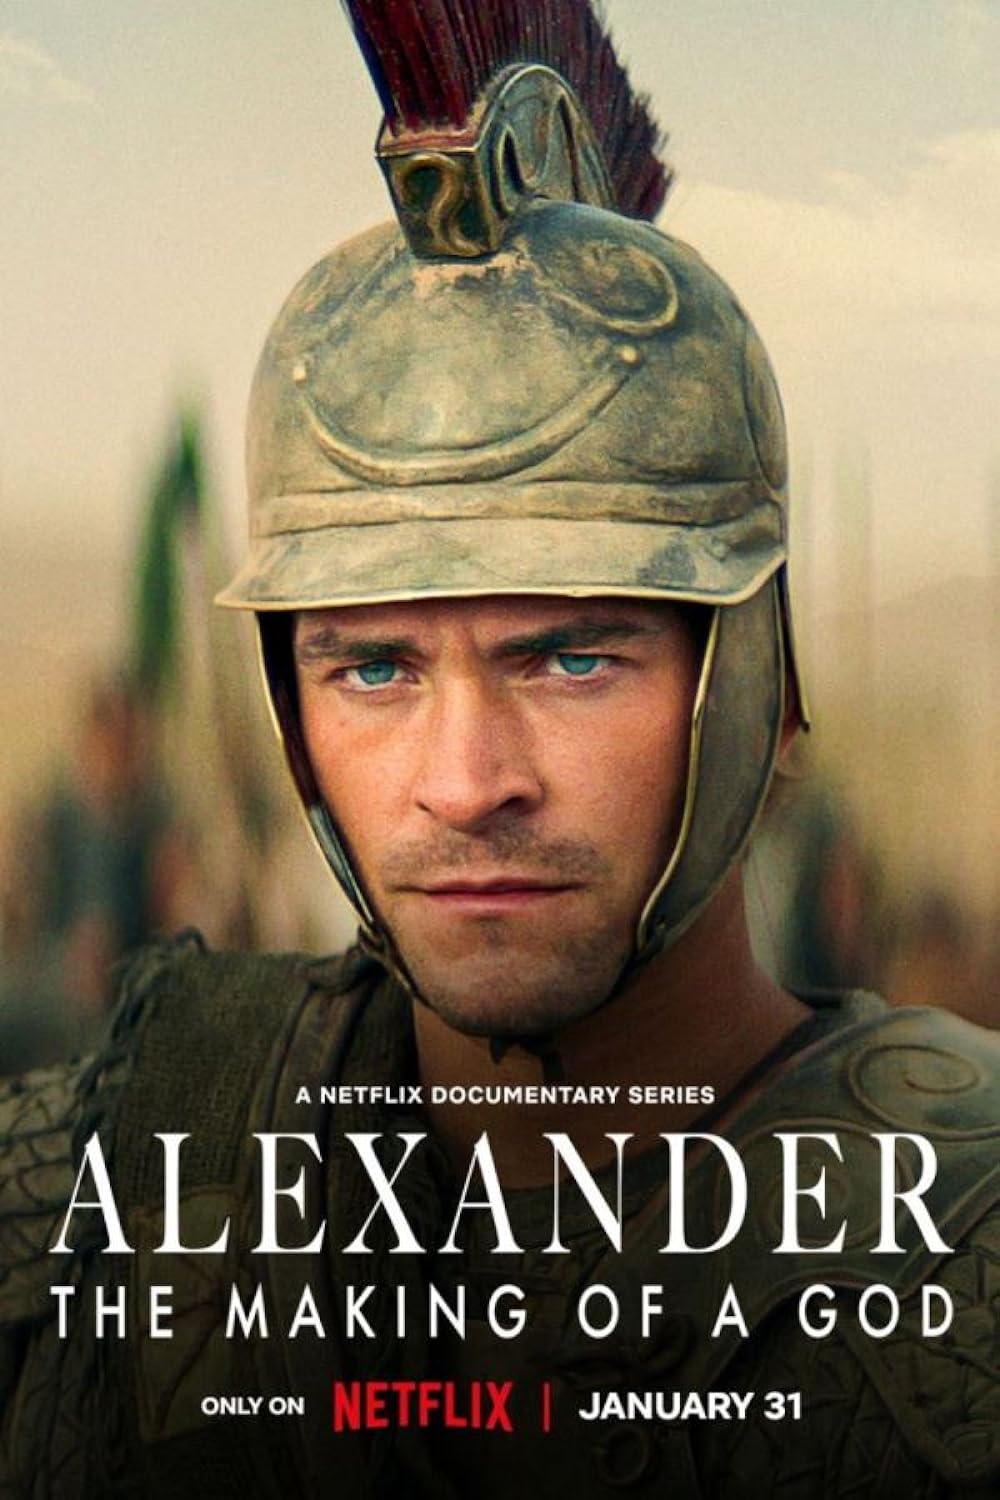 Alexander: The Making of a God (January 31) - Streaming on NetflixAlexander: The Making of a God is an enthralling docudrama delving into the remarkable life of Alexander the Great. The six-part series traces his journey from a young warrior prince to a historical figure, revered as a living god. The series offers a unique blend of dramatic storytelling, expert academic insights, and groundbreaking archaeology, exploring Alexander’s rise from exile and his obsessive quest to defeat Persian Emperor Darius, leading to the rapid expansion of his empire. It revisits his military triumphs, the establishment of his vast empire, and delves into his complex psyche and the legacy he left behind.